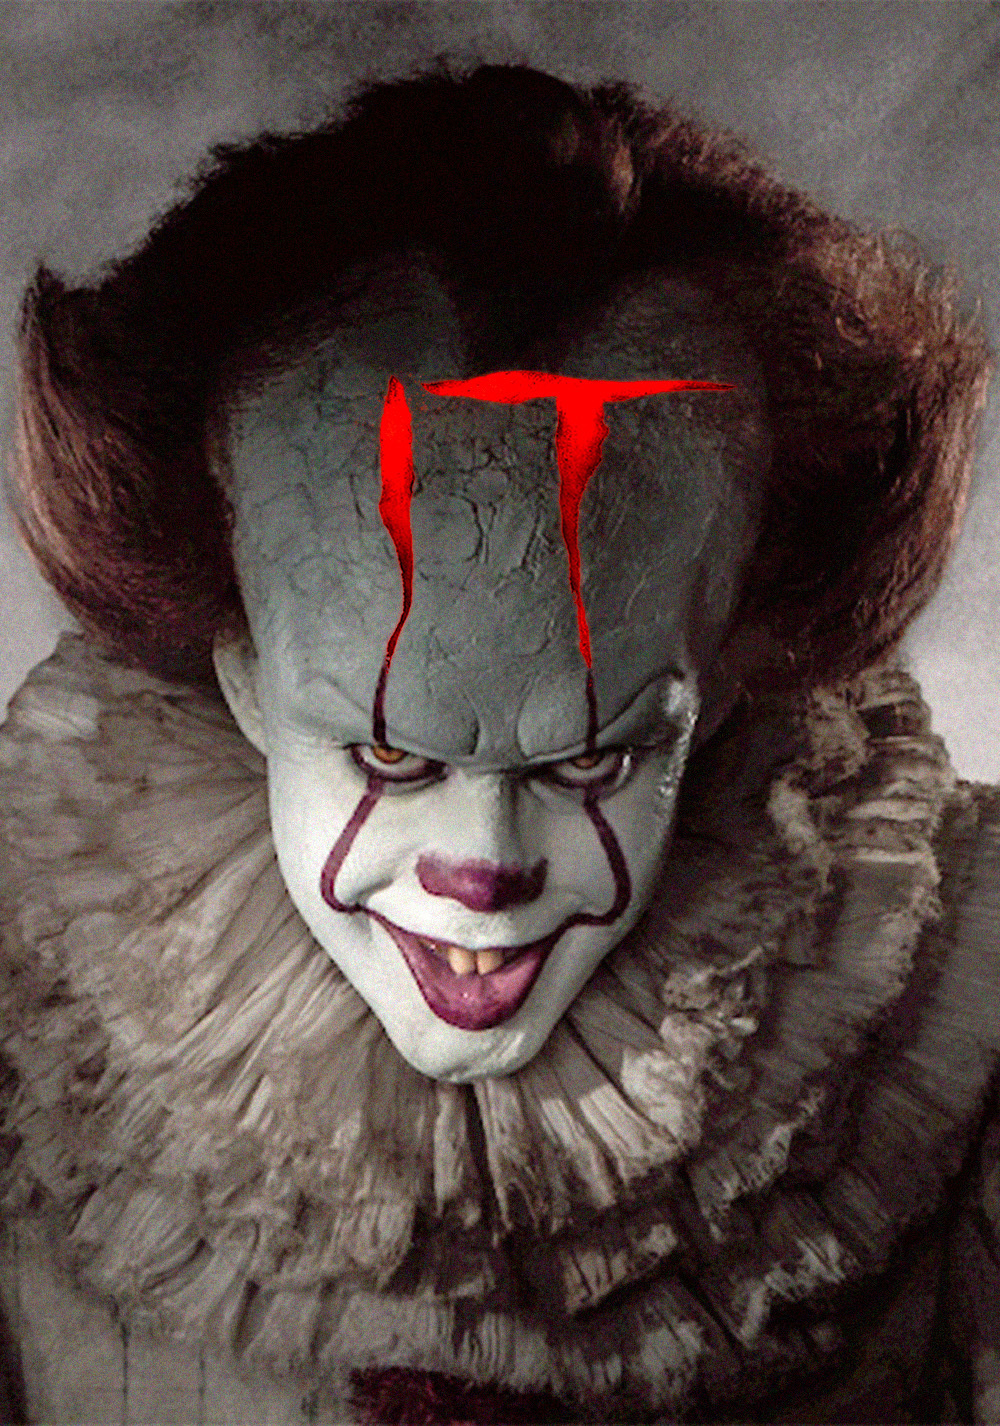 Poster for the movie "It"